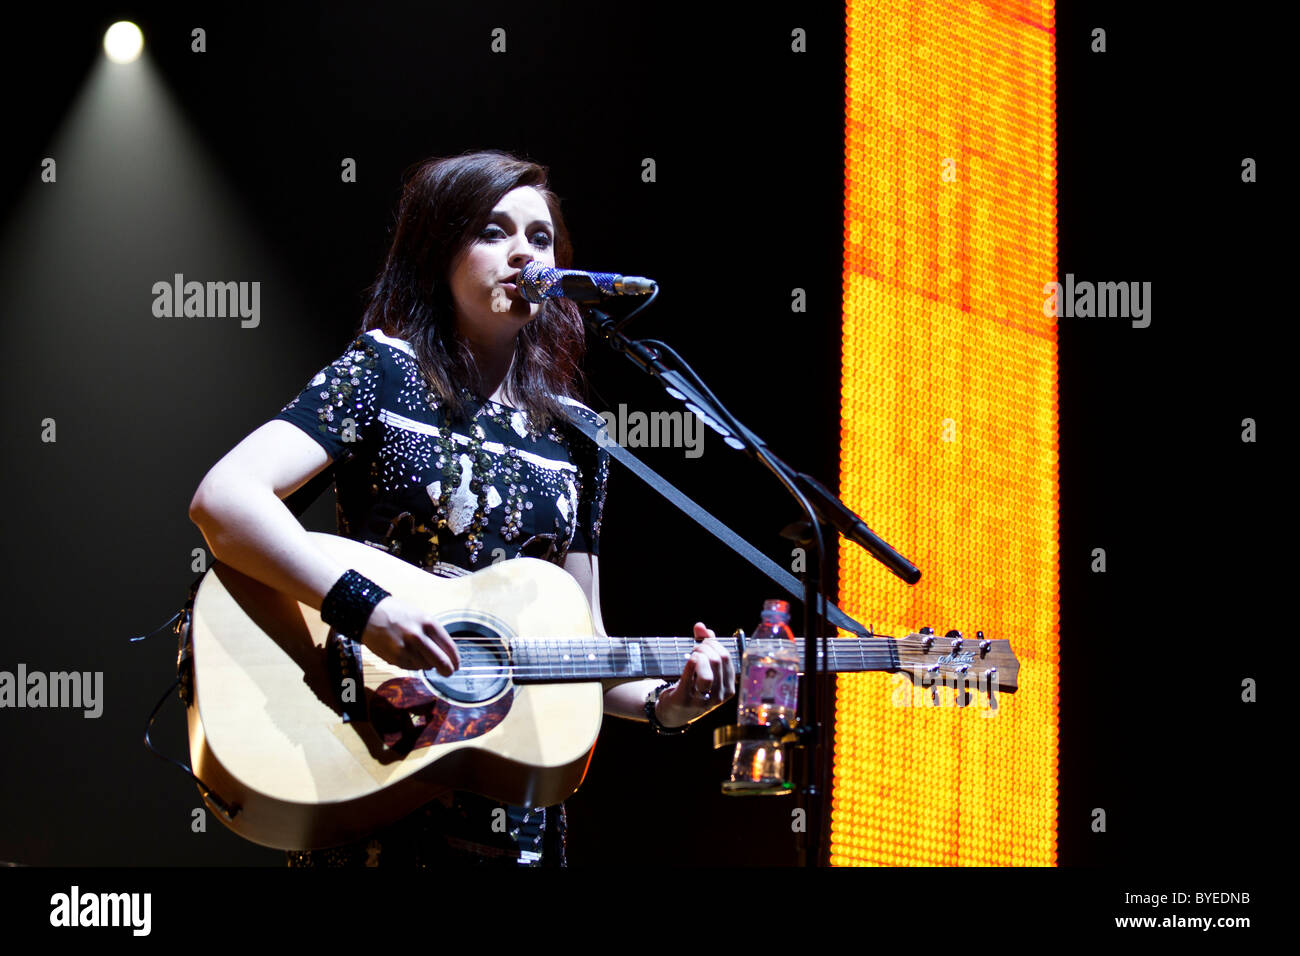 Scottish singer-songwriter Amy Macdonald performing live at the Hallenstadion multi-purpose facility in Zurich, Switzerland Stock Photo